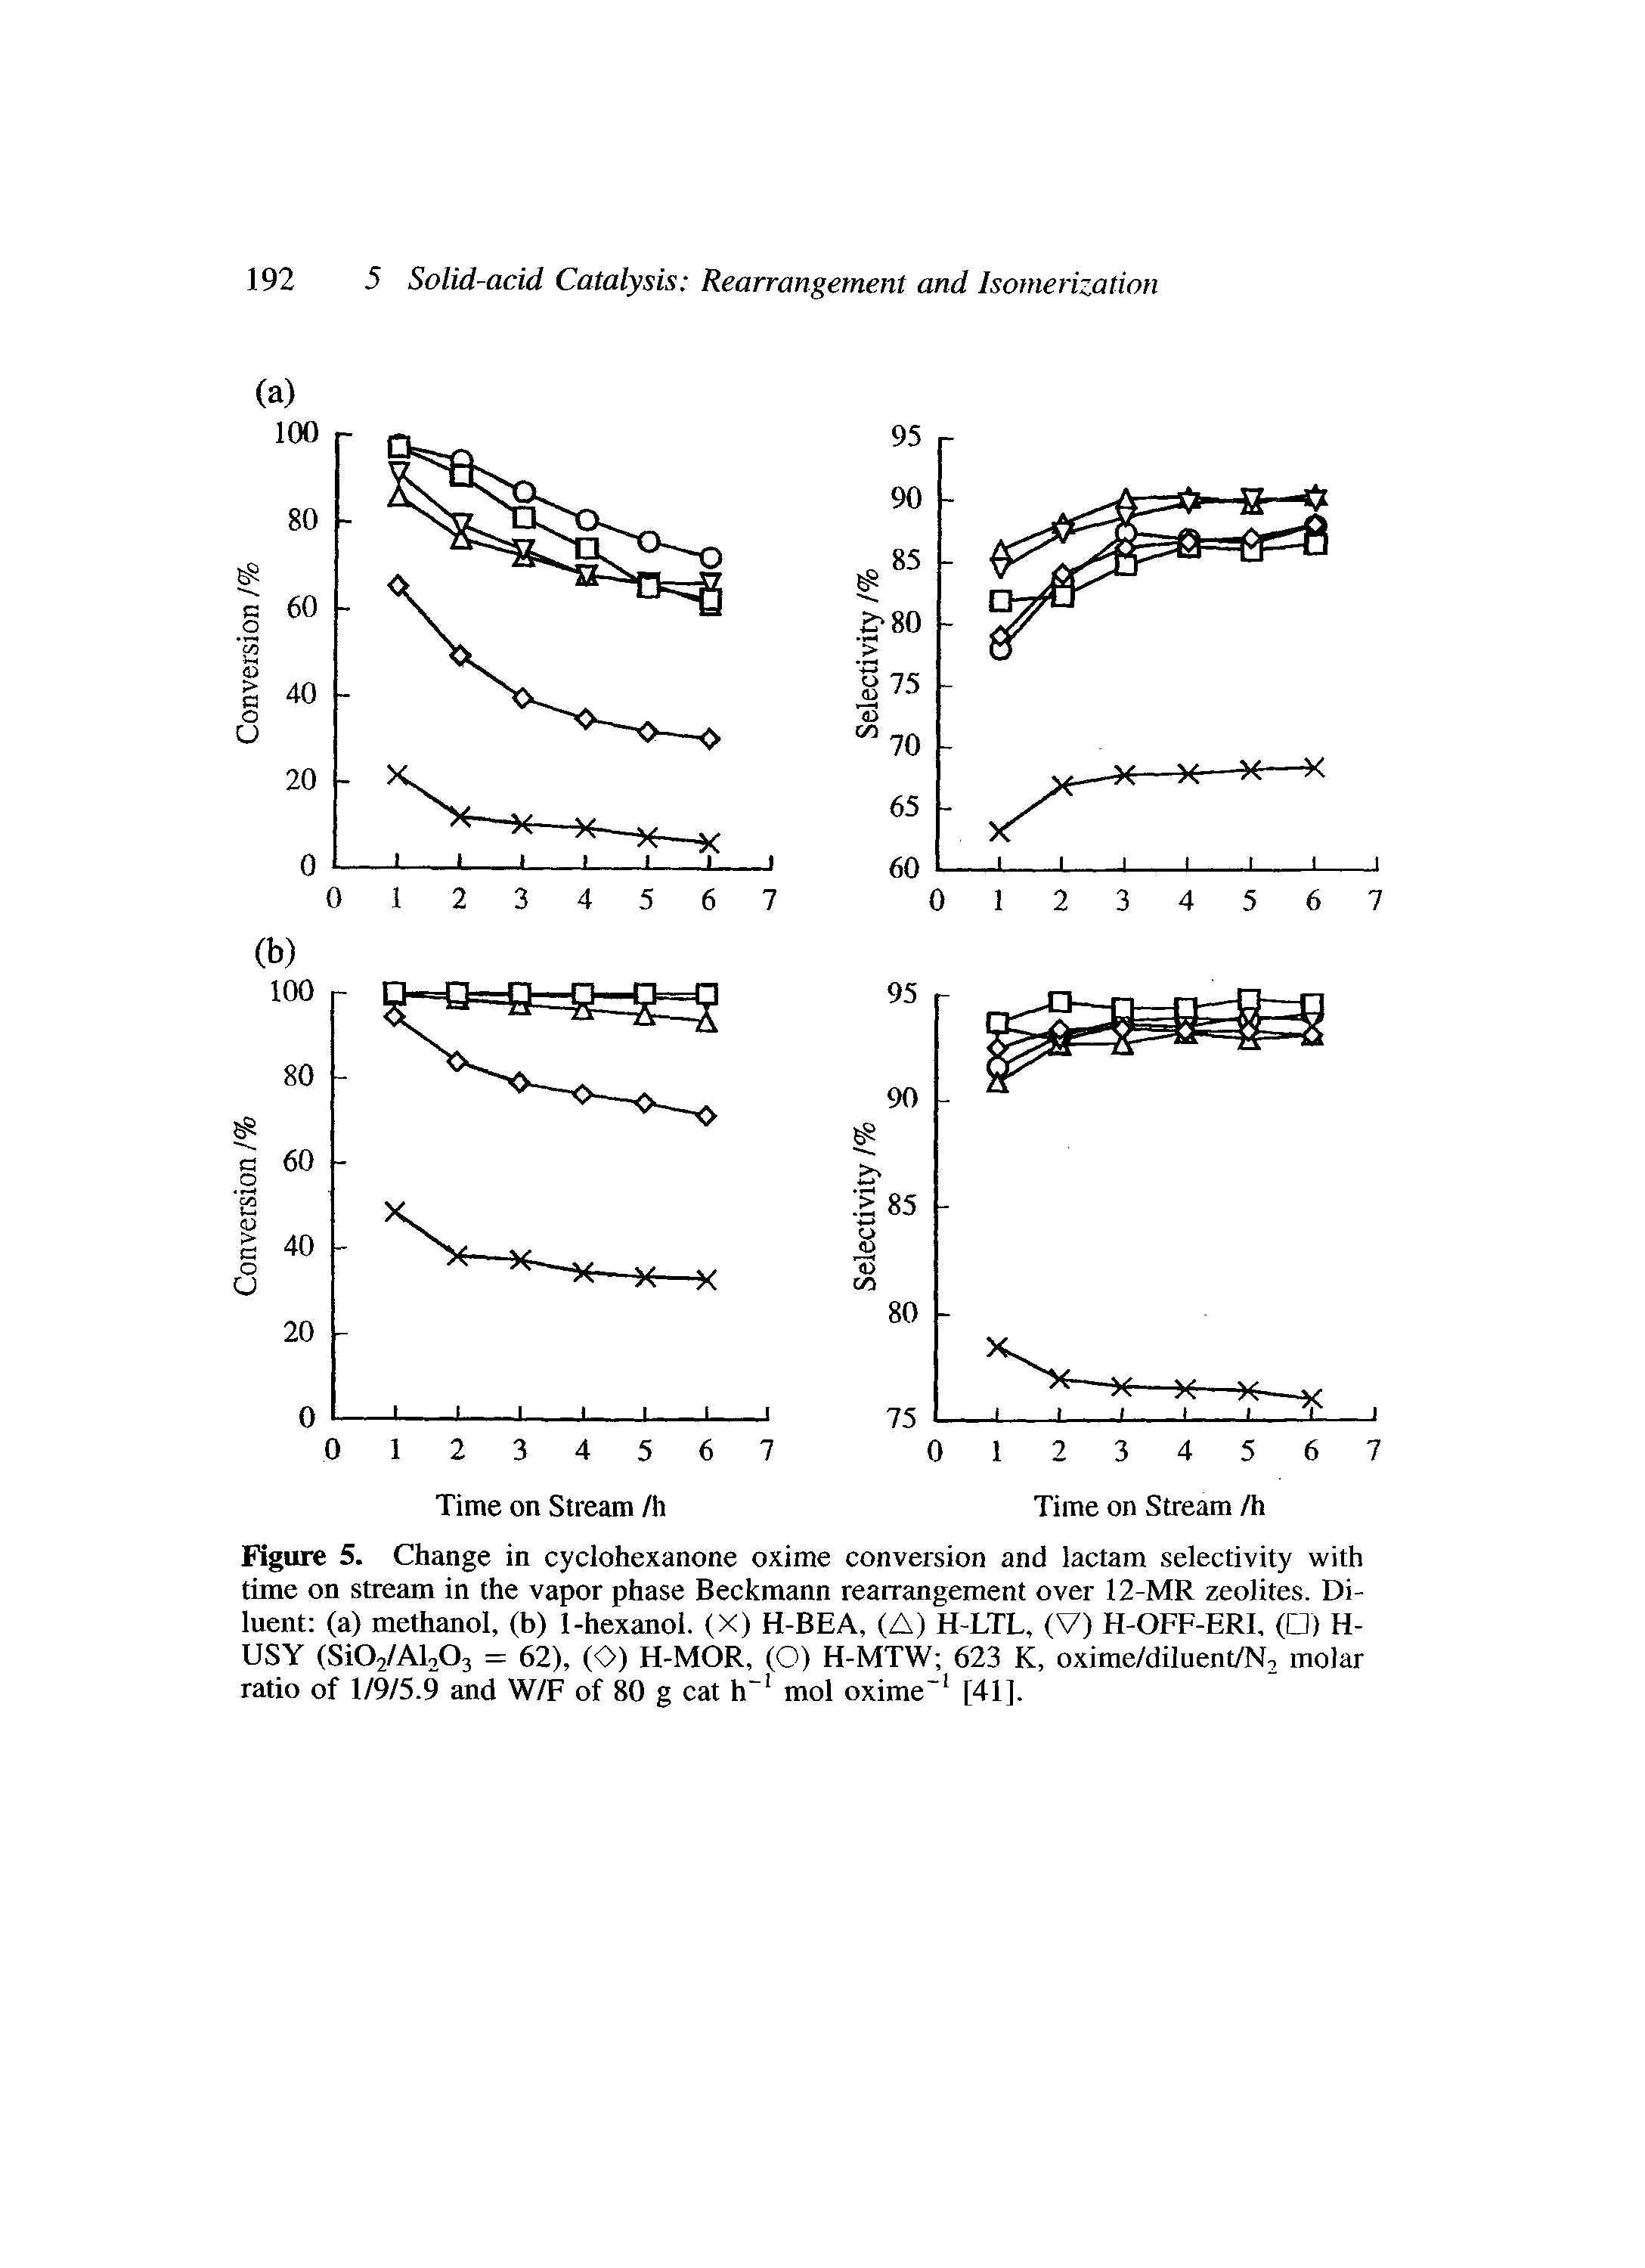 Figure 5. Change in cyclohexanone oxime conversion and lactam selectivity with time on stream in the vapor phase Beckmann rearrangement over 12-MR zeolites. Diluent (a) methanol, (b) 1-hexanol. (X) H-BEA, (A) H-LTL, (V) H-OFF-ERI, ( ) H-USY (Si02/Al203 = 62), (O) H-MOR, (O) H-MTW 623 K, oxime/diluent/N, molar ratio of 1/9/5.9 and W/F of 80 g cat h mol oxime [41].